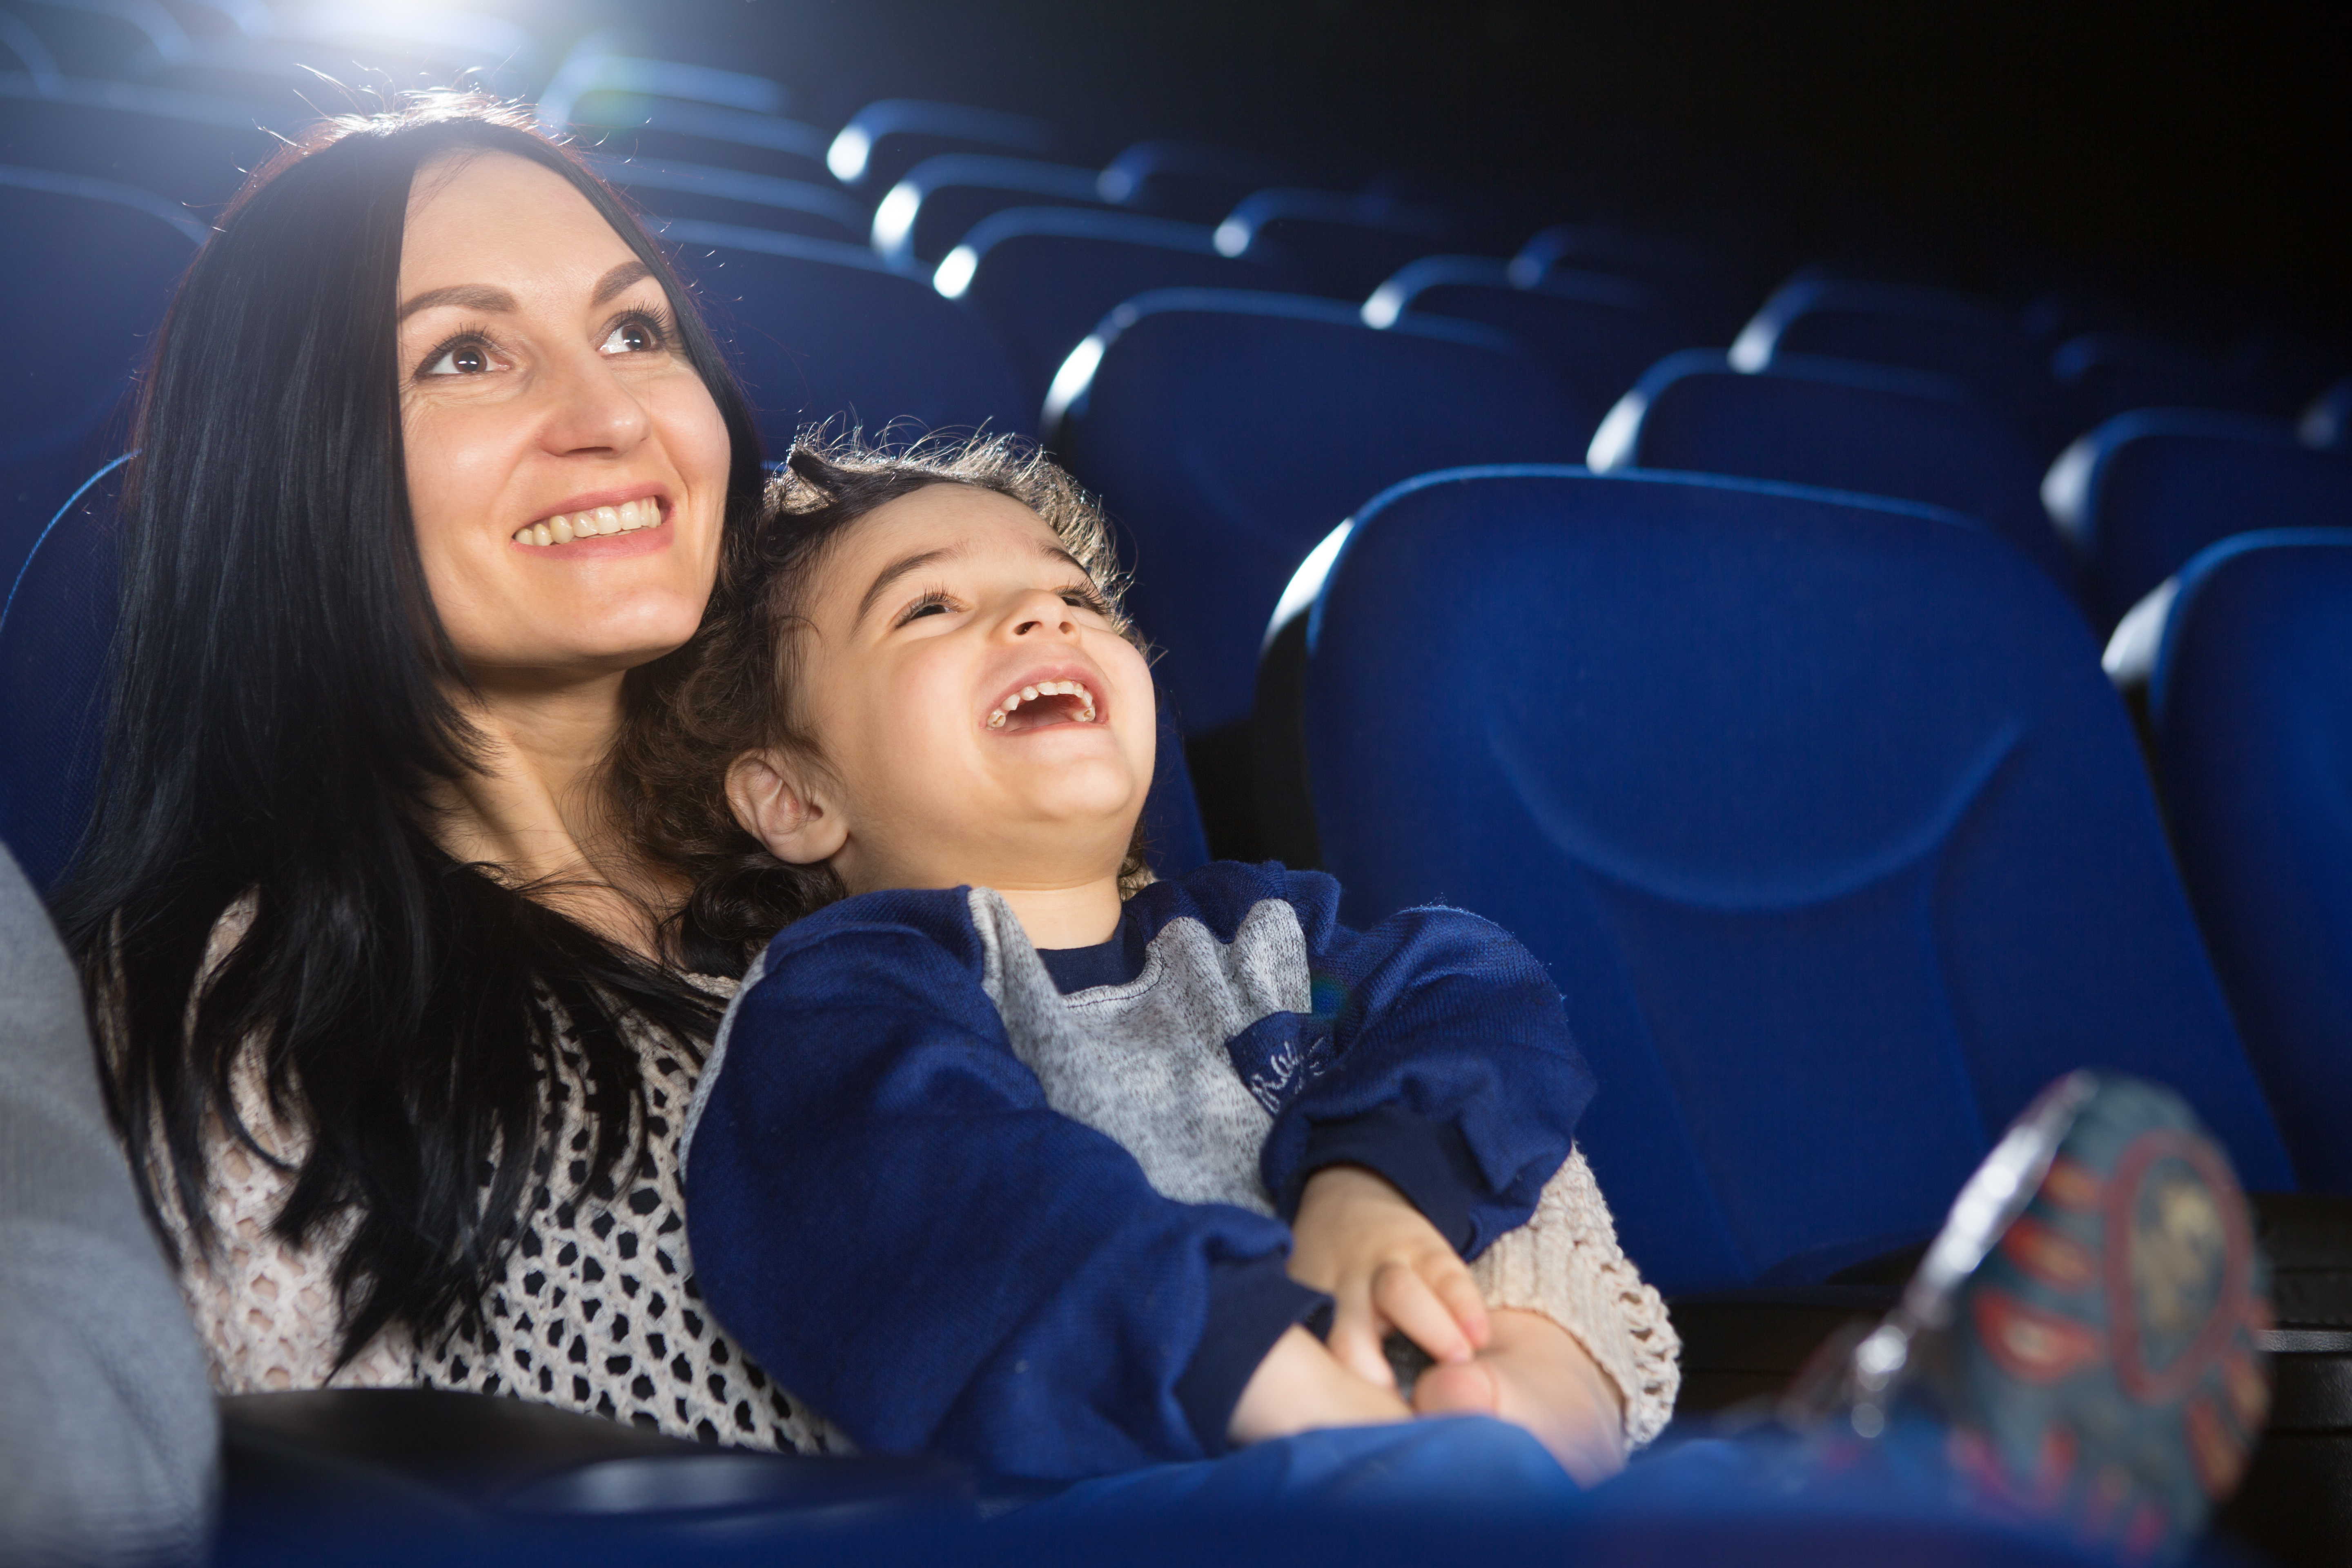 A mum and child sitting in a cinema looking at the screen and smiling